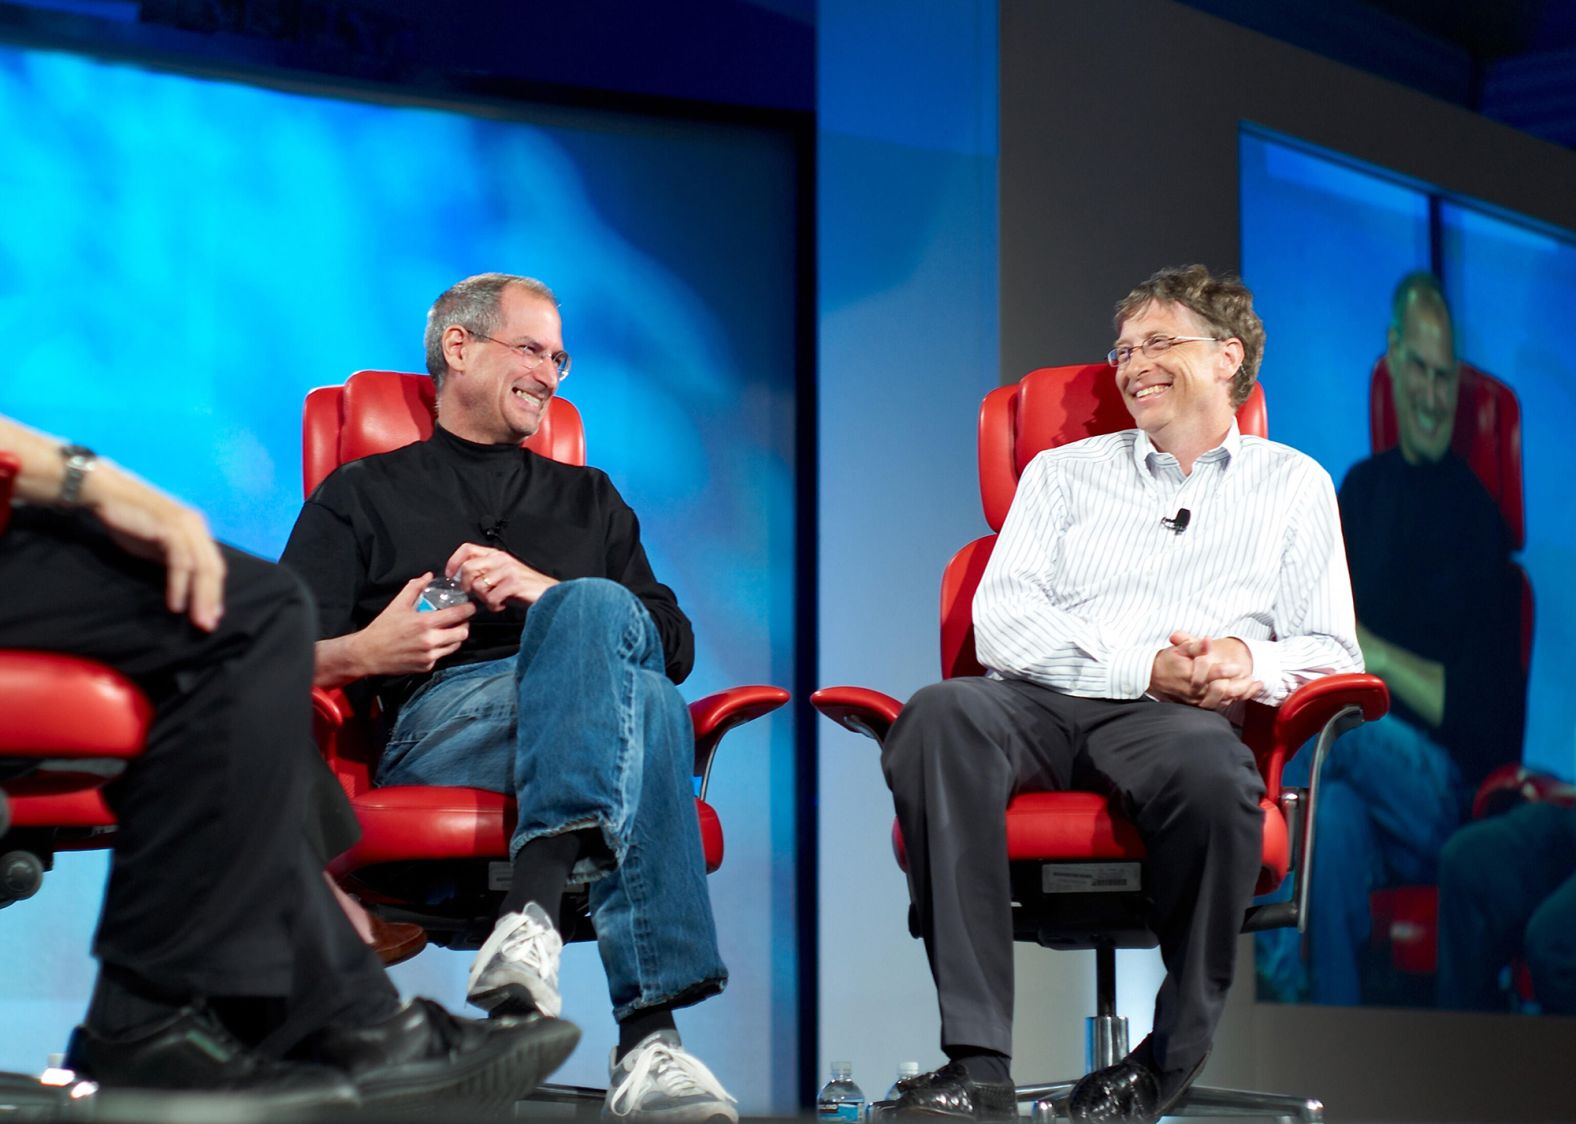 Gates and Apple CEO Steve Jobs attend the All Things Digital conference in Carlsbad, California, in 2007.